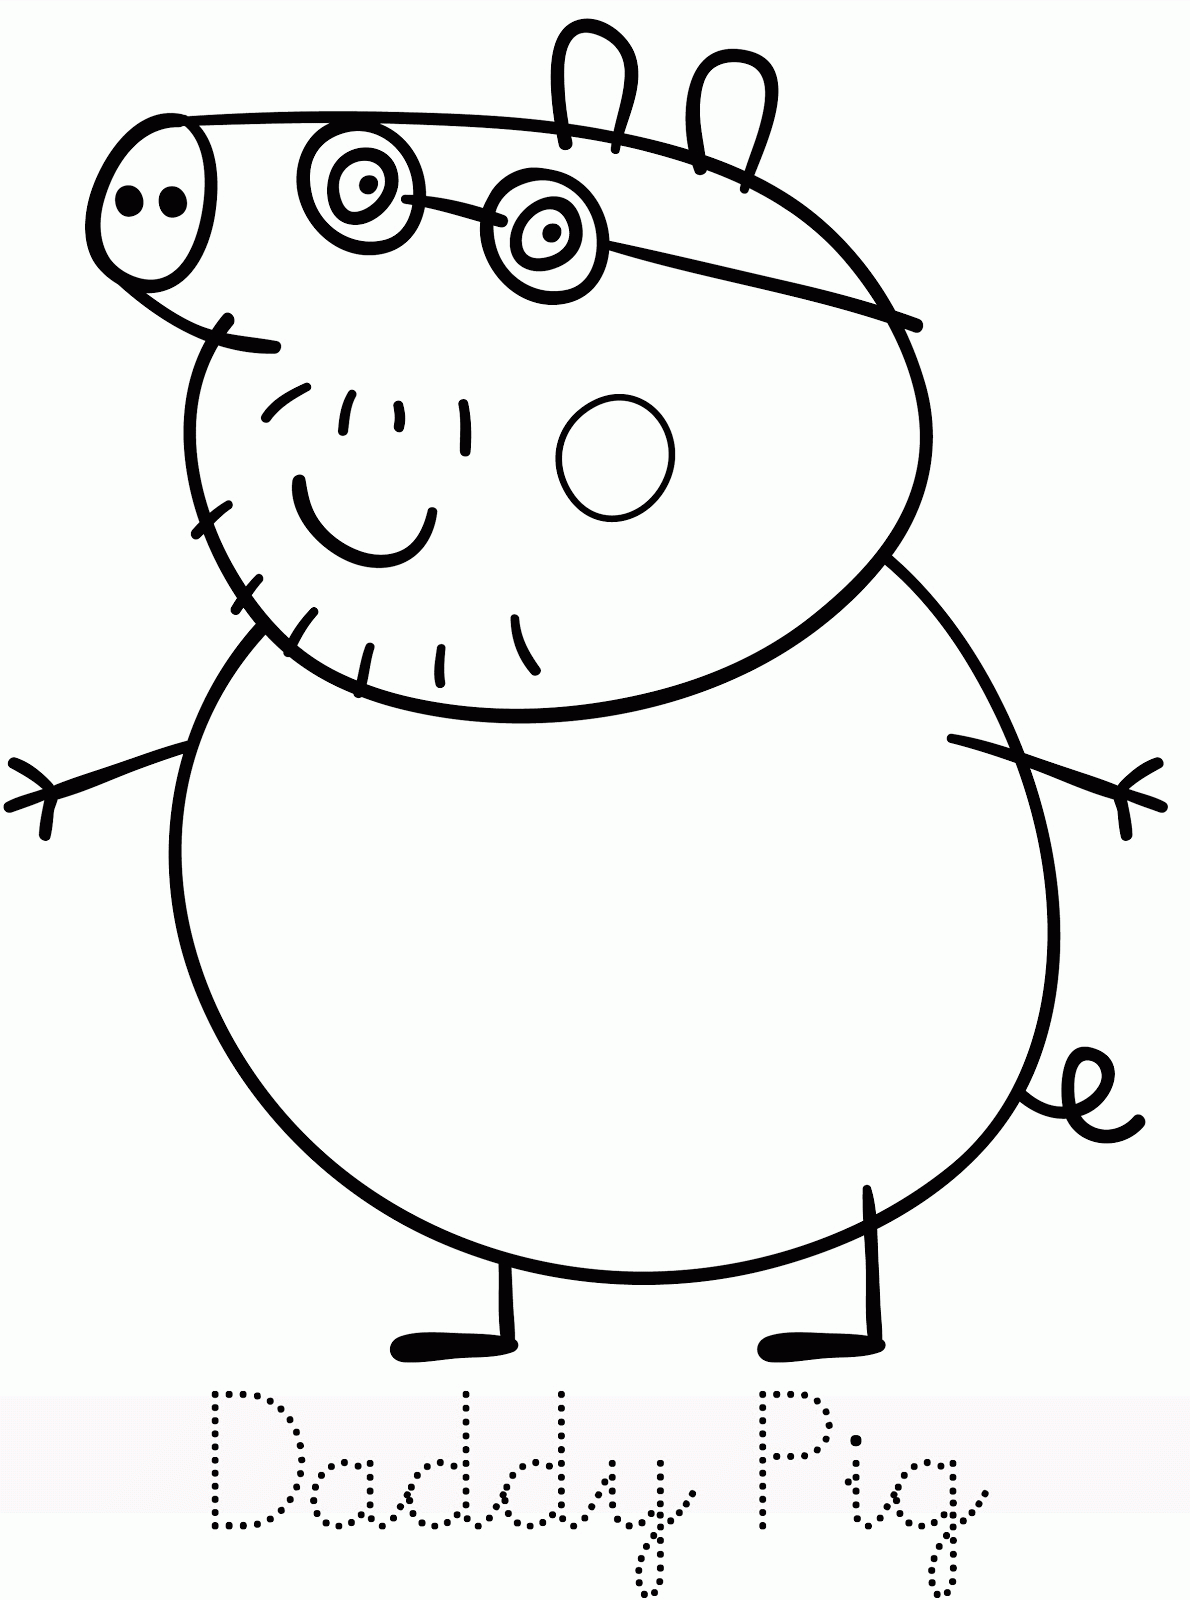 Peppa Pig Family Coloring Pages - Coloring Home